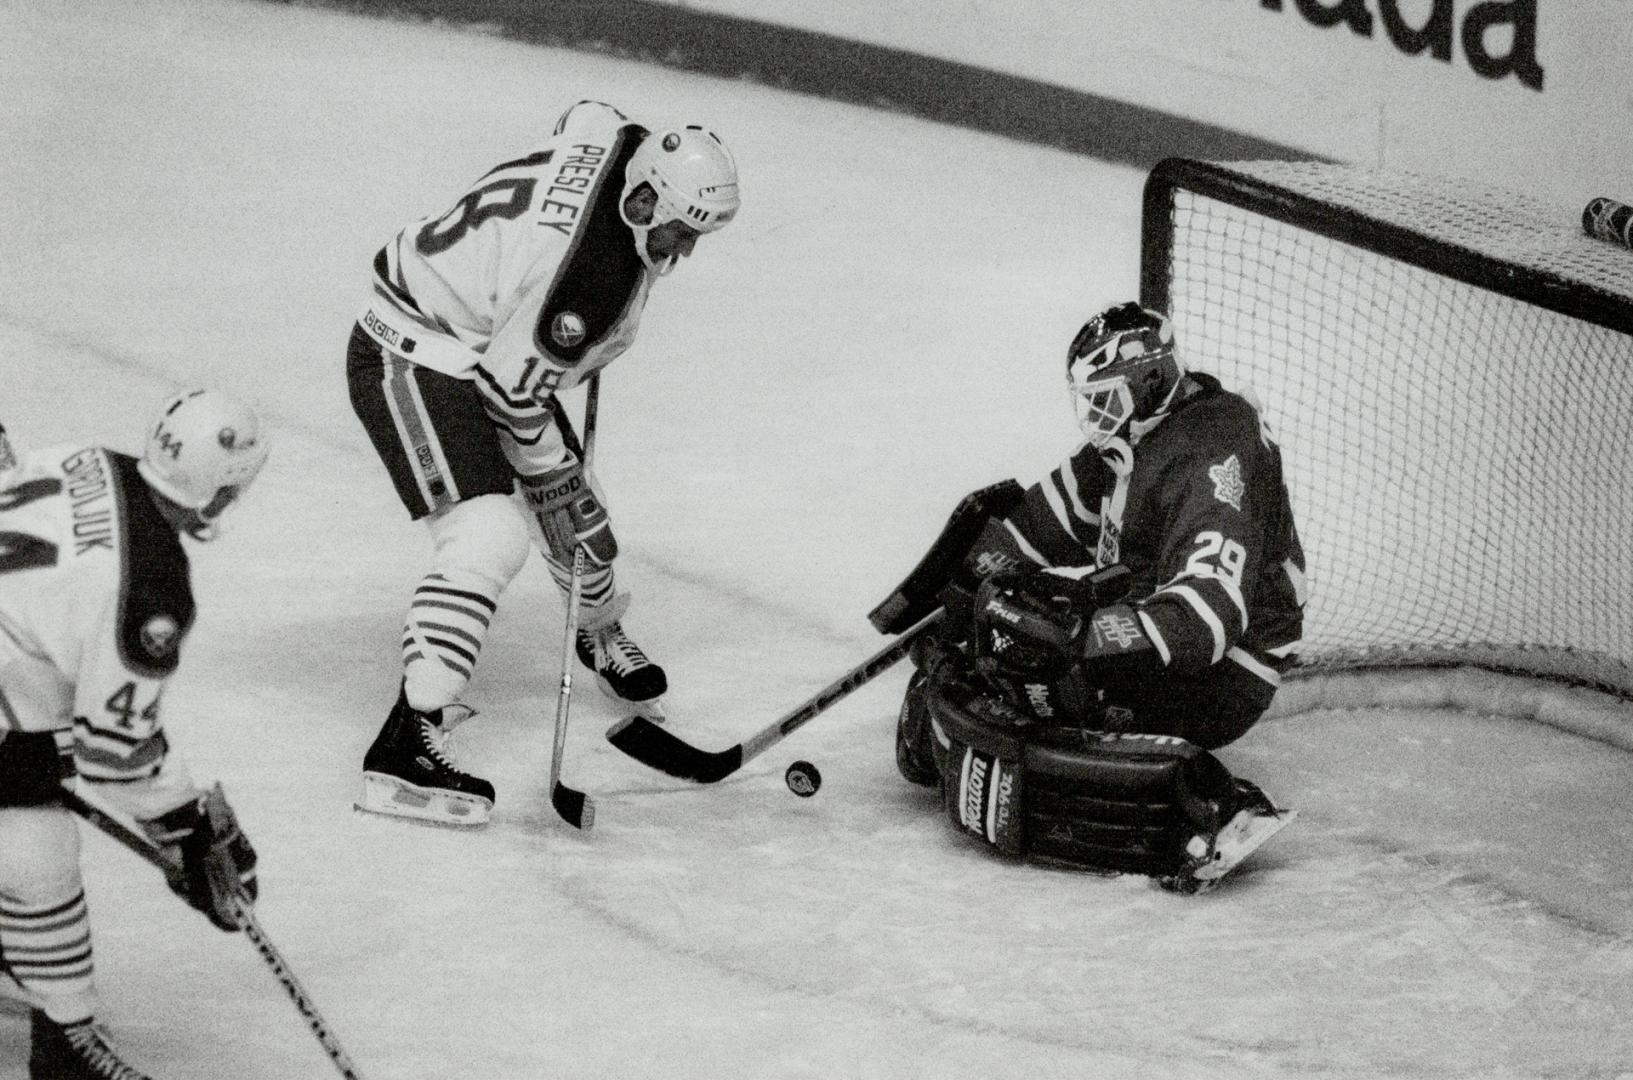 Sniper on the doorstep. Leafs goalie Felix Potvin crouches and appears to have all the angles covered on Buffalo sniper Wayne Presley. Potvin played s(...)